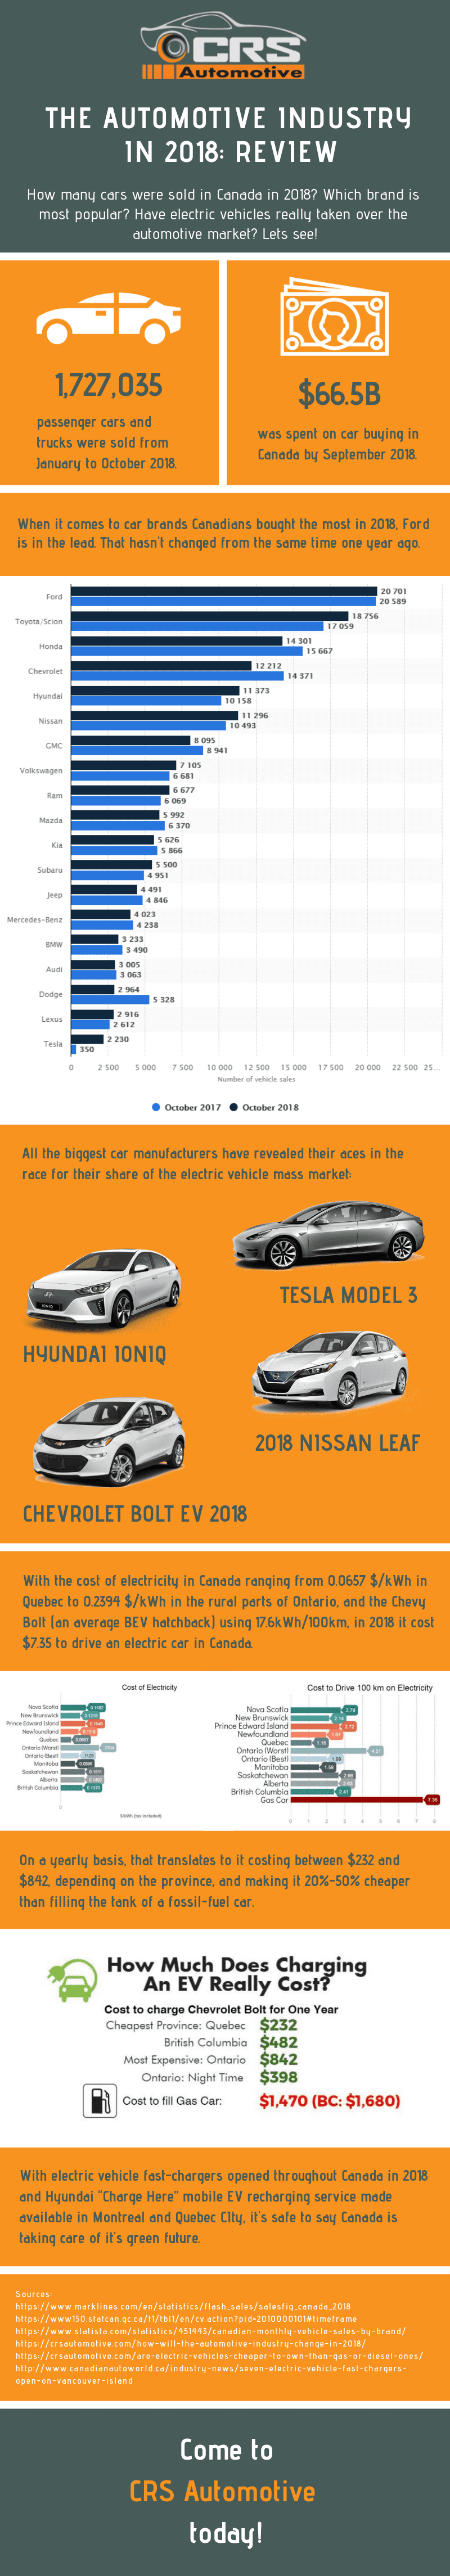 The Automotive Industry In 2018 Infographic